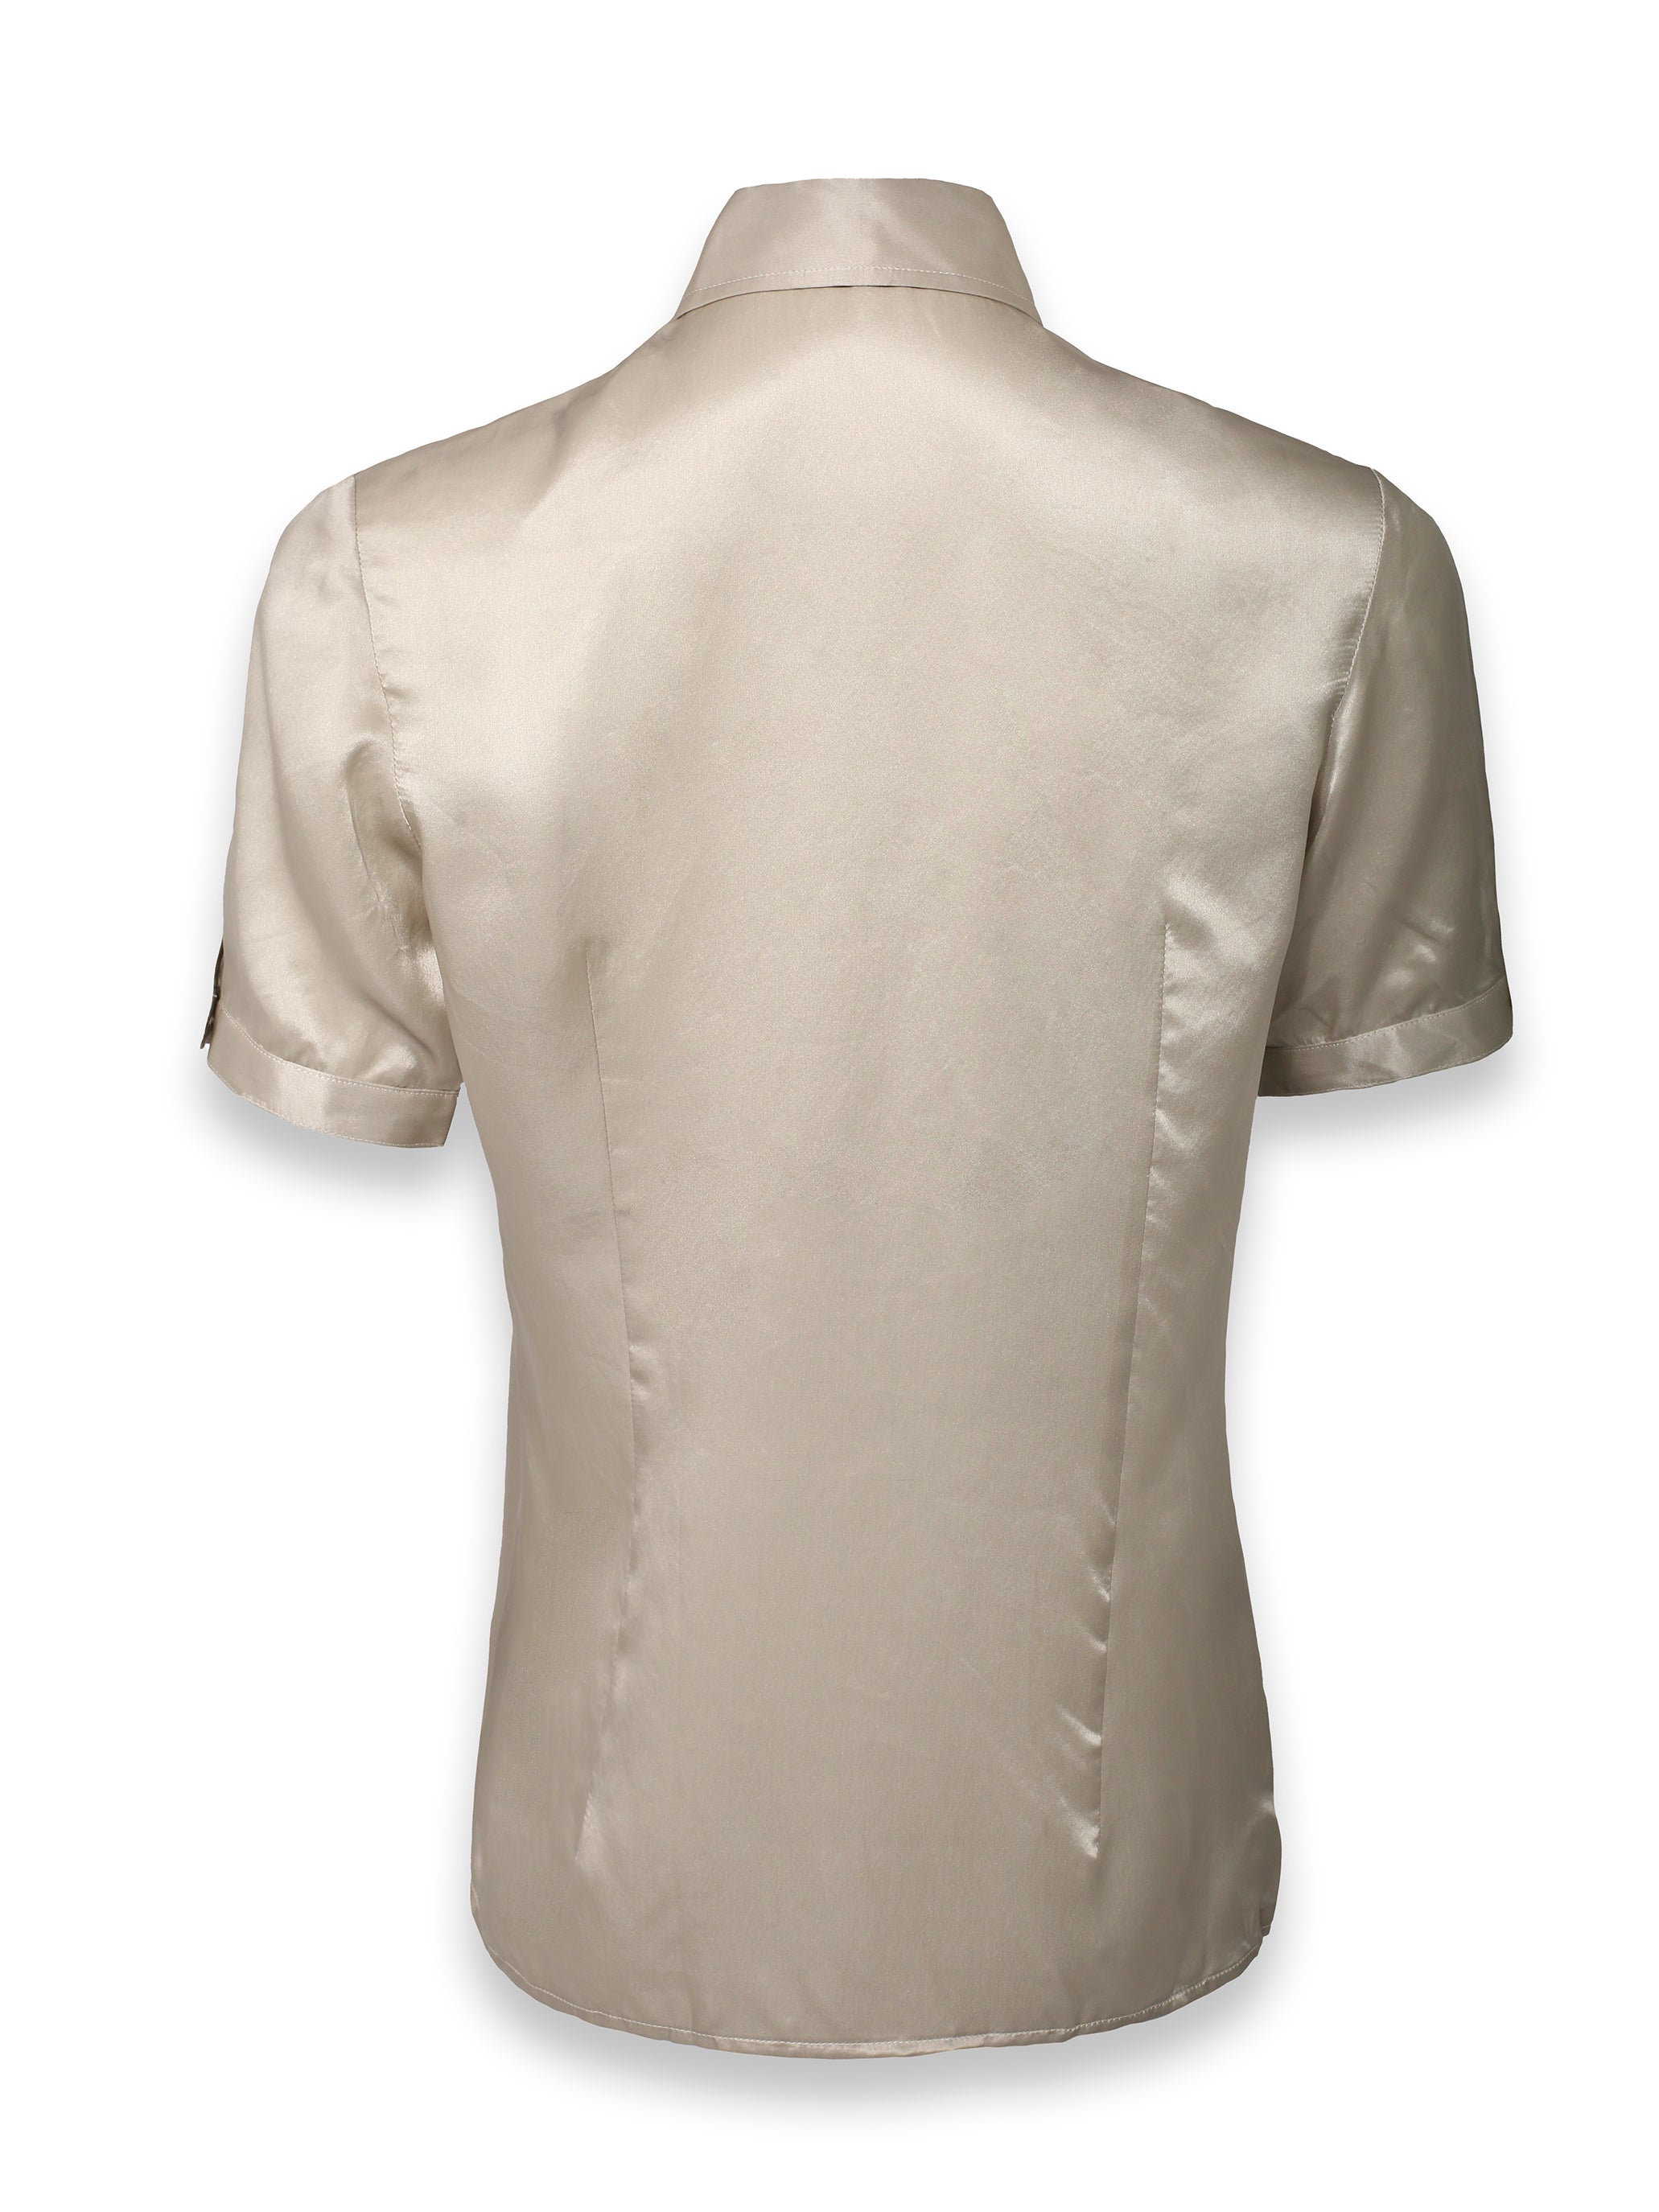 Champagne Silk Blouse With Cut Out Detail